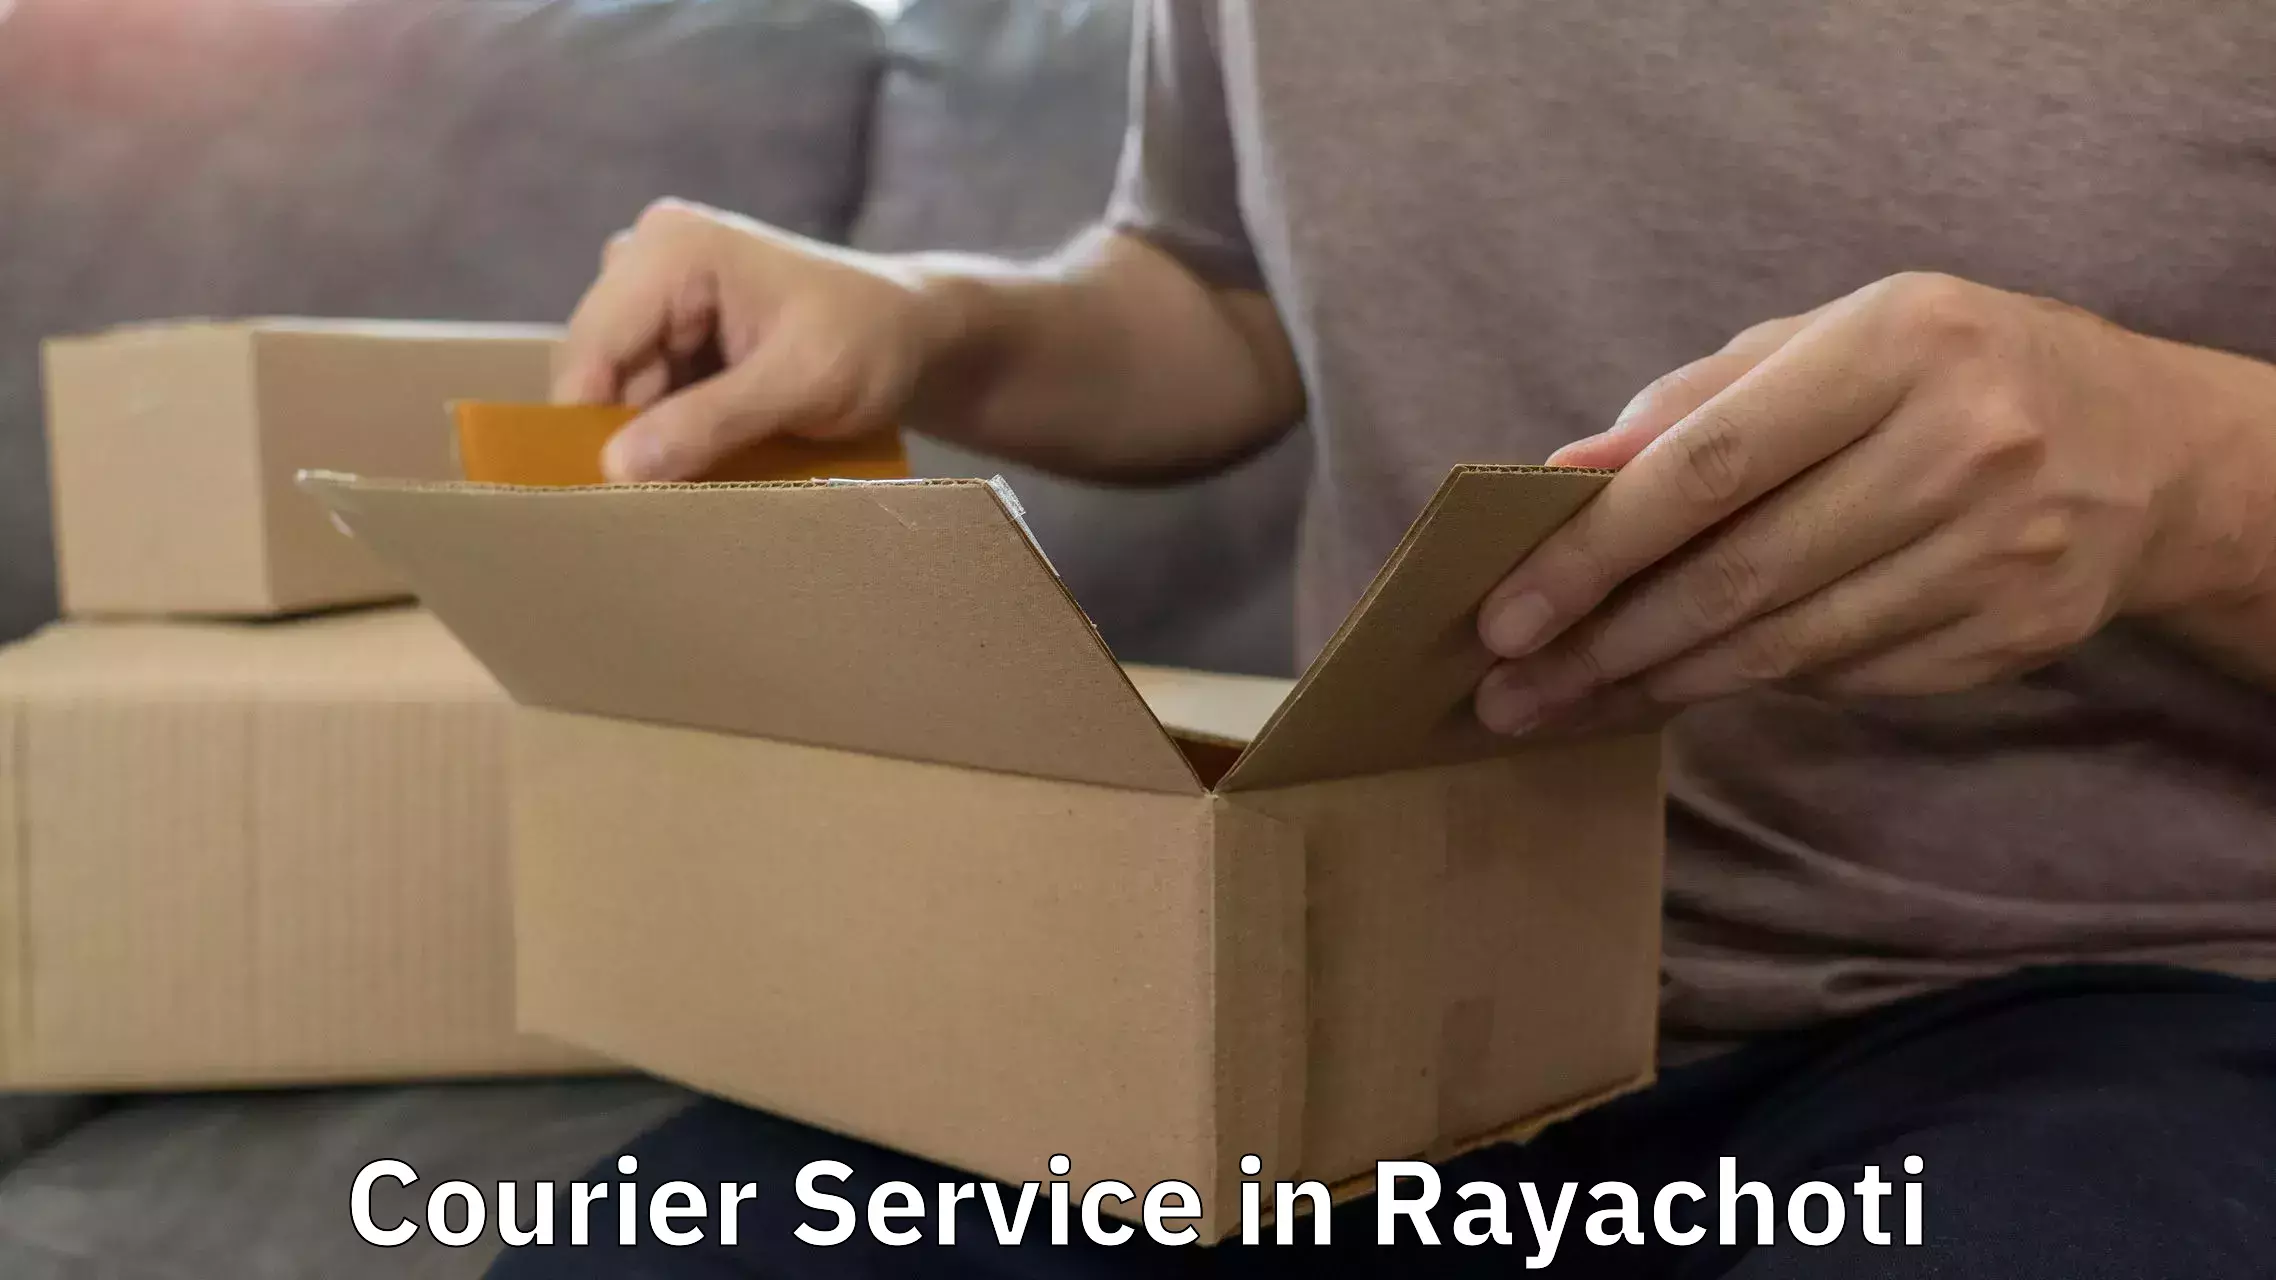 Cash on delivery service in Rayachoti